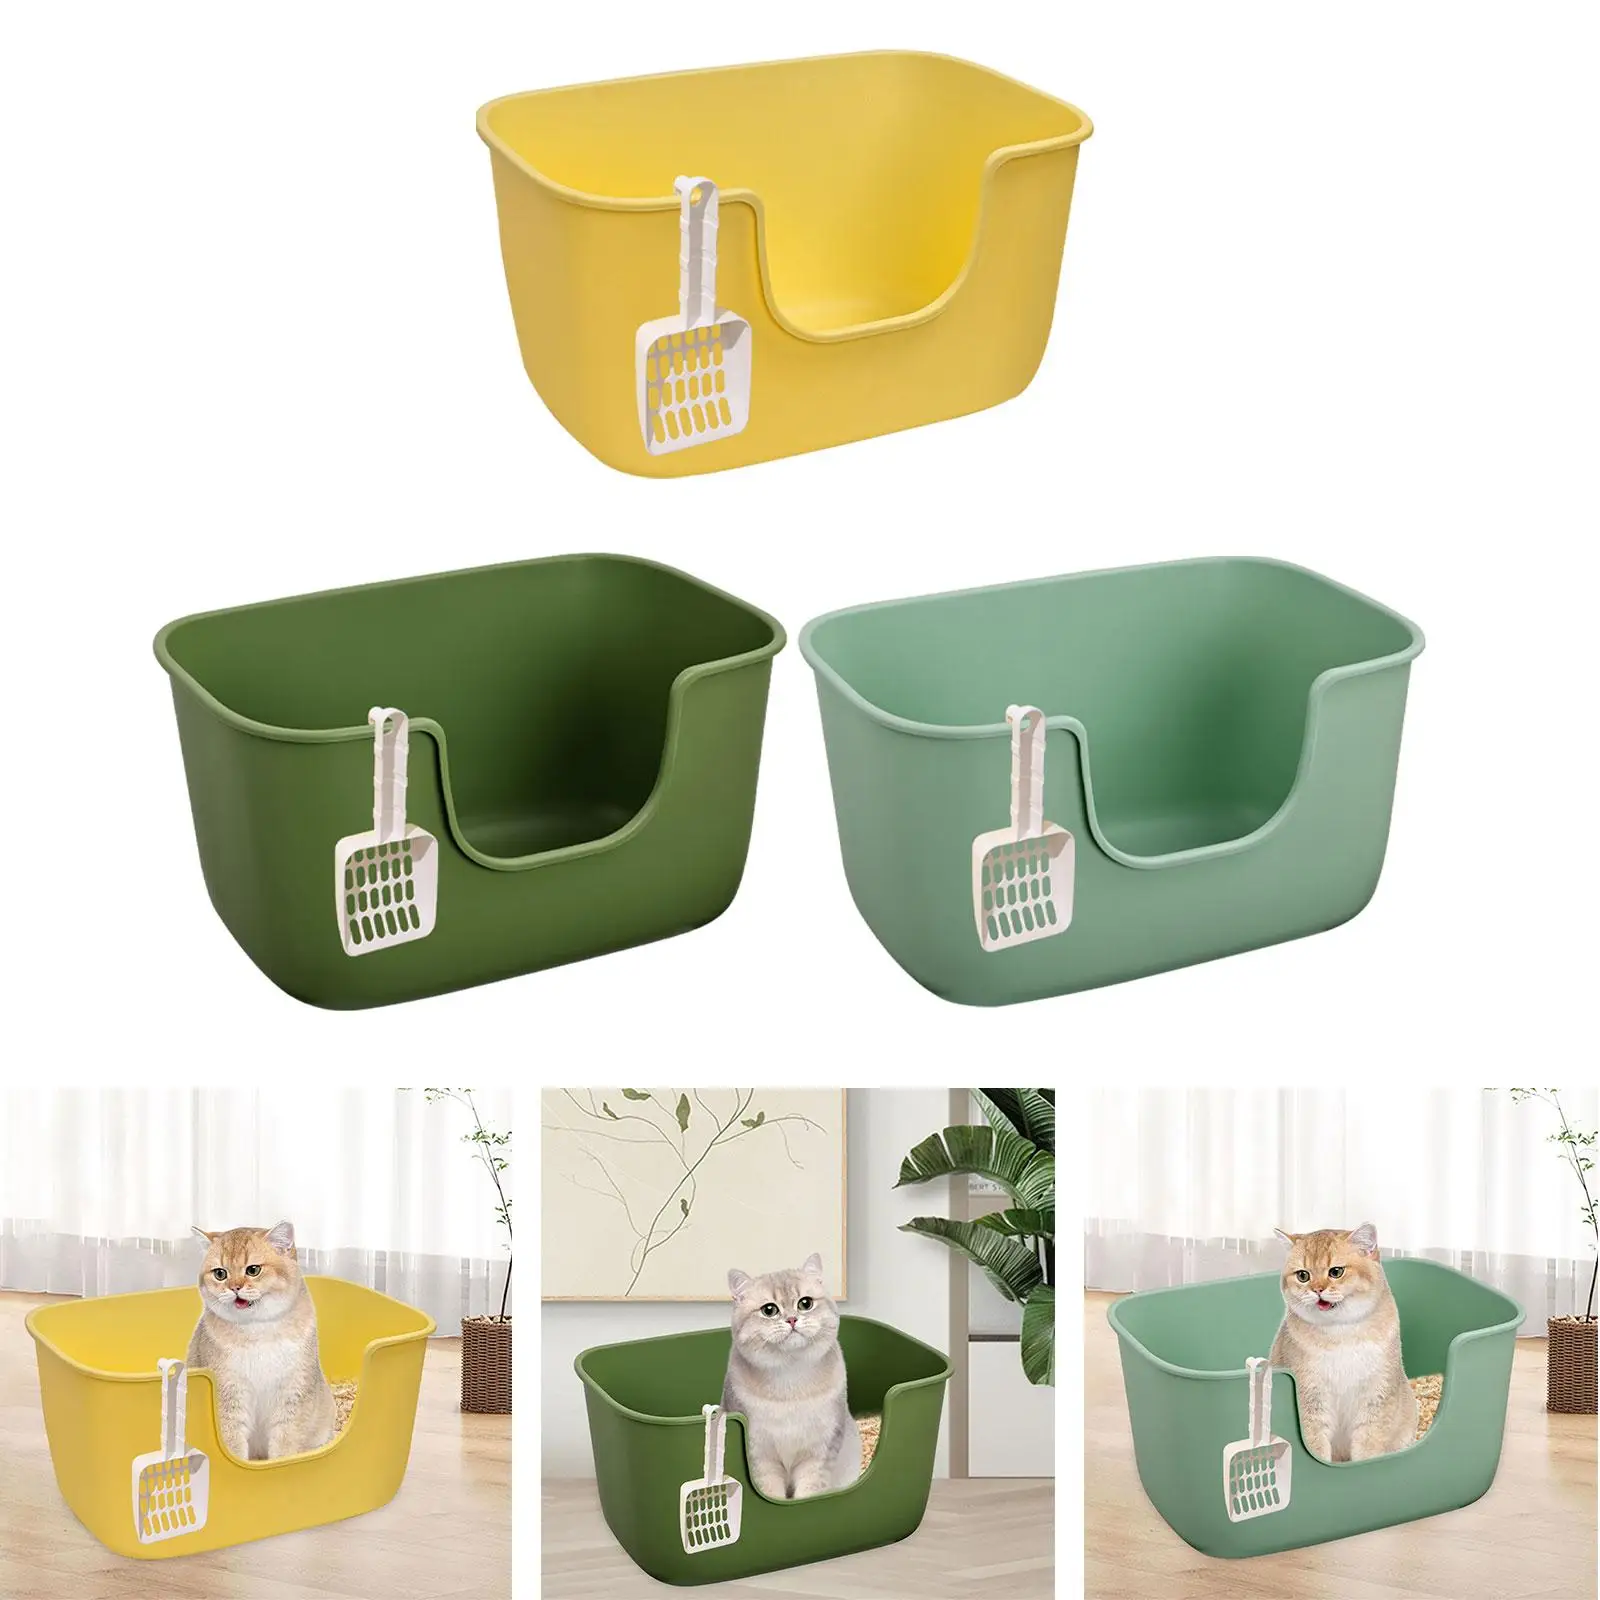 High Sided Cat Litter Boxs, Litter Pans, Cage Accessories for Kitty Indoor Cats, Hamsters Small Animals